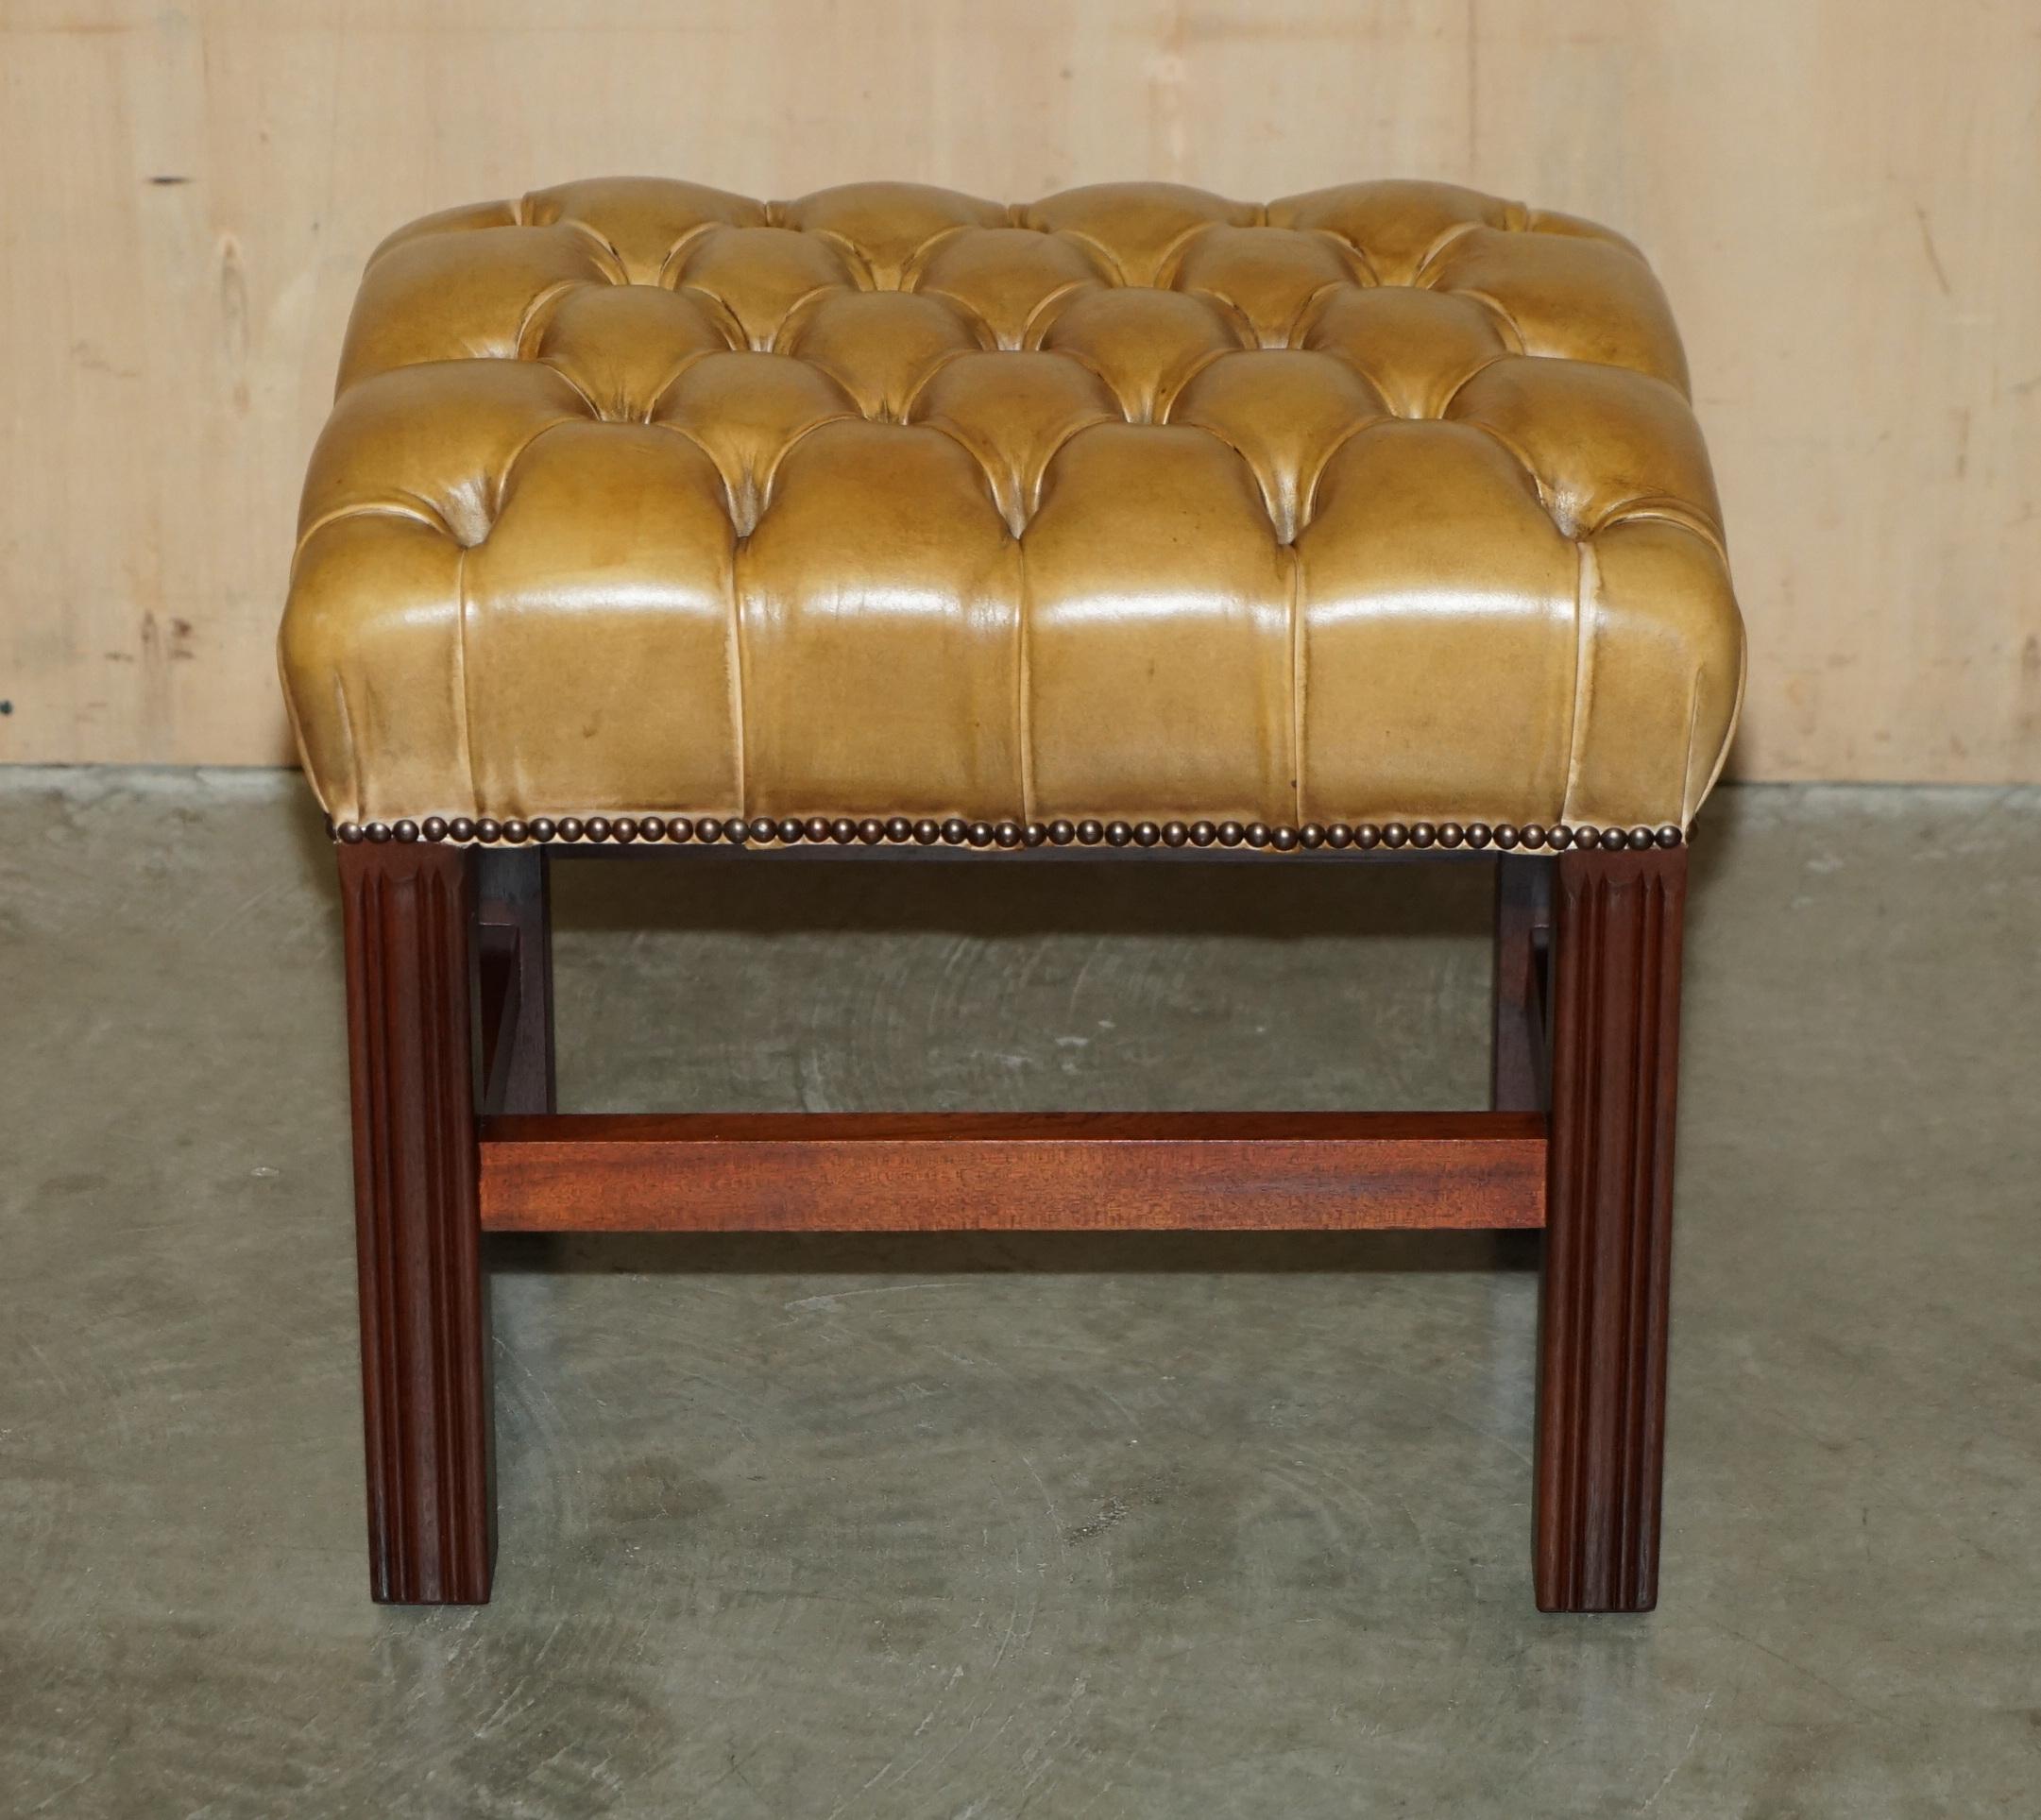 Royal House Antiques

Royal House Antiques is delighted to offer for sale this stunning, lightly restored aged tan brown leather Chesterfield tufted footstool which is part of a suite

Please note the delivery fee listed is just a guide, it covers